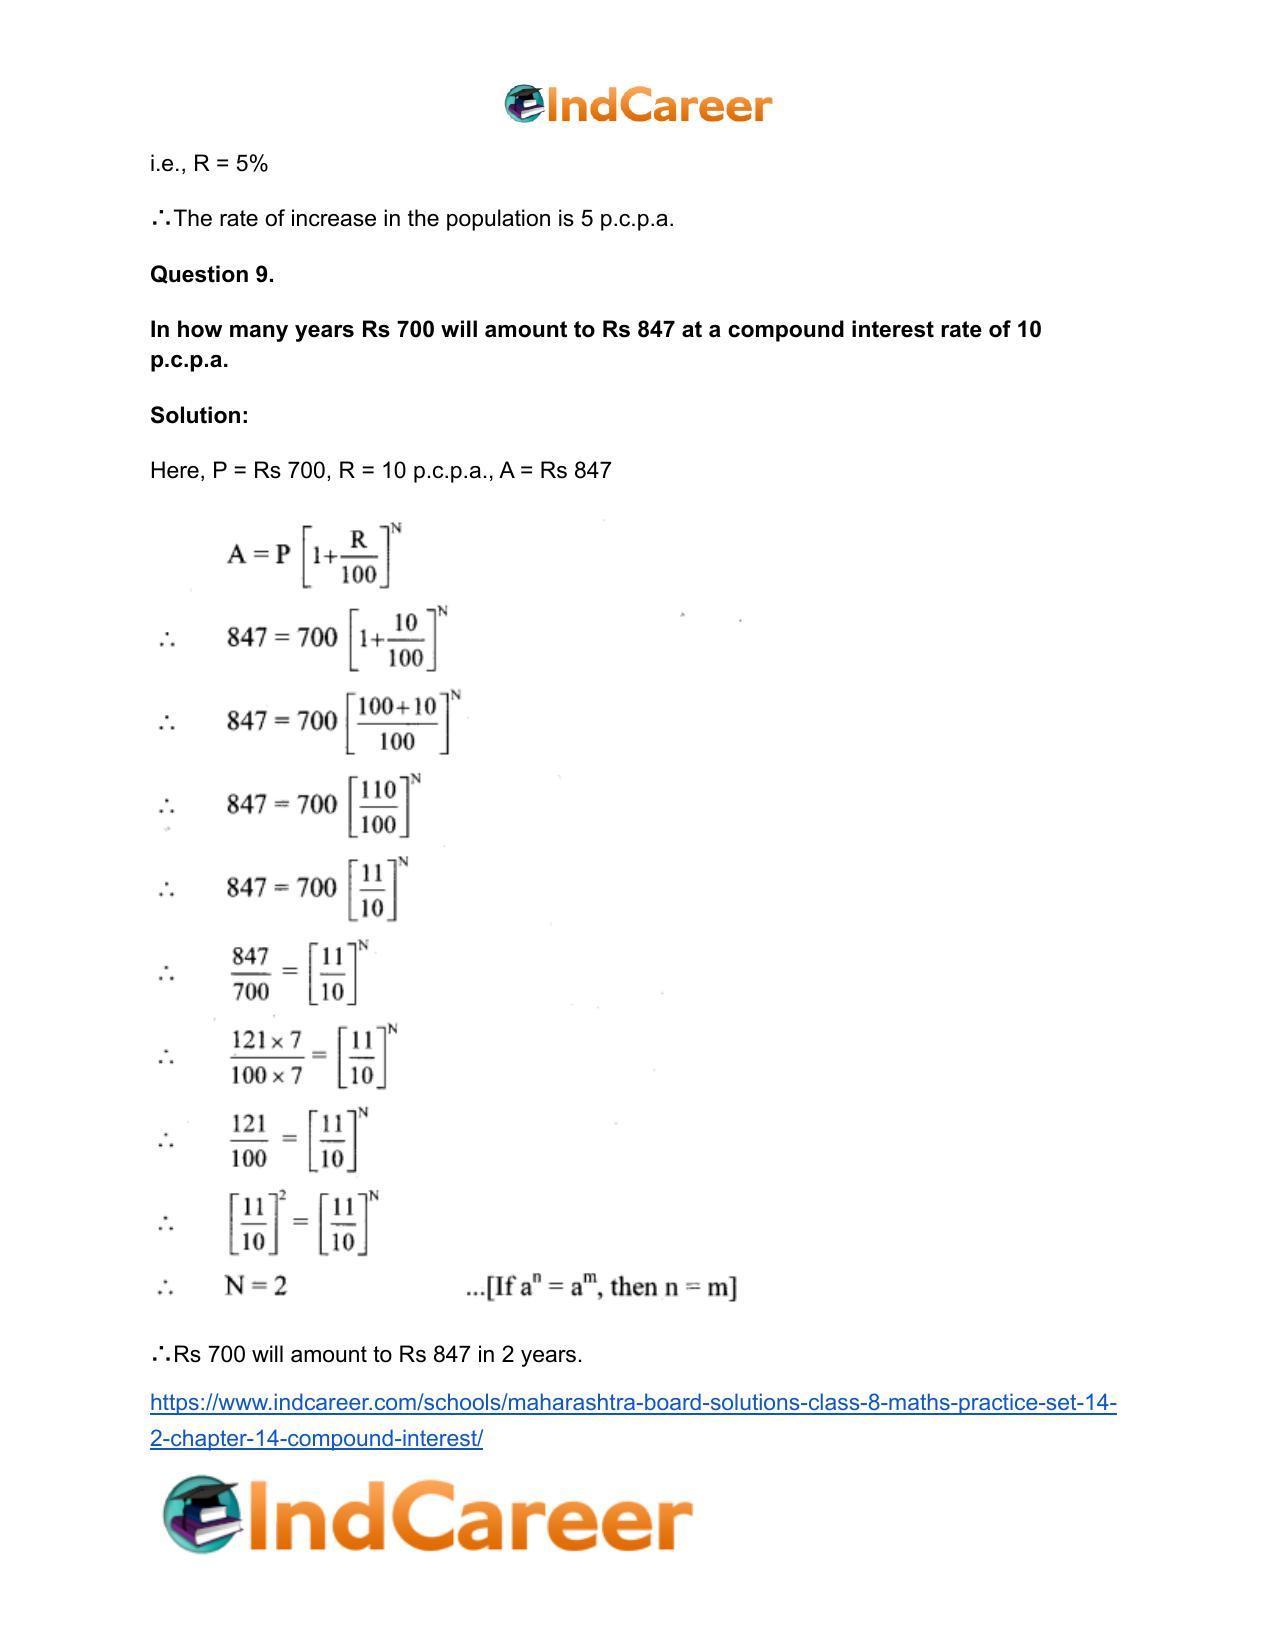 Maharashtra Board Solutions Class 8-Maths (Practice Set 14.2): Chapter 14- Compound Interest - Page 11